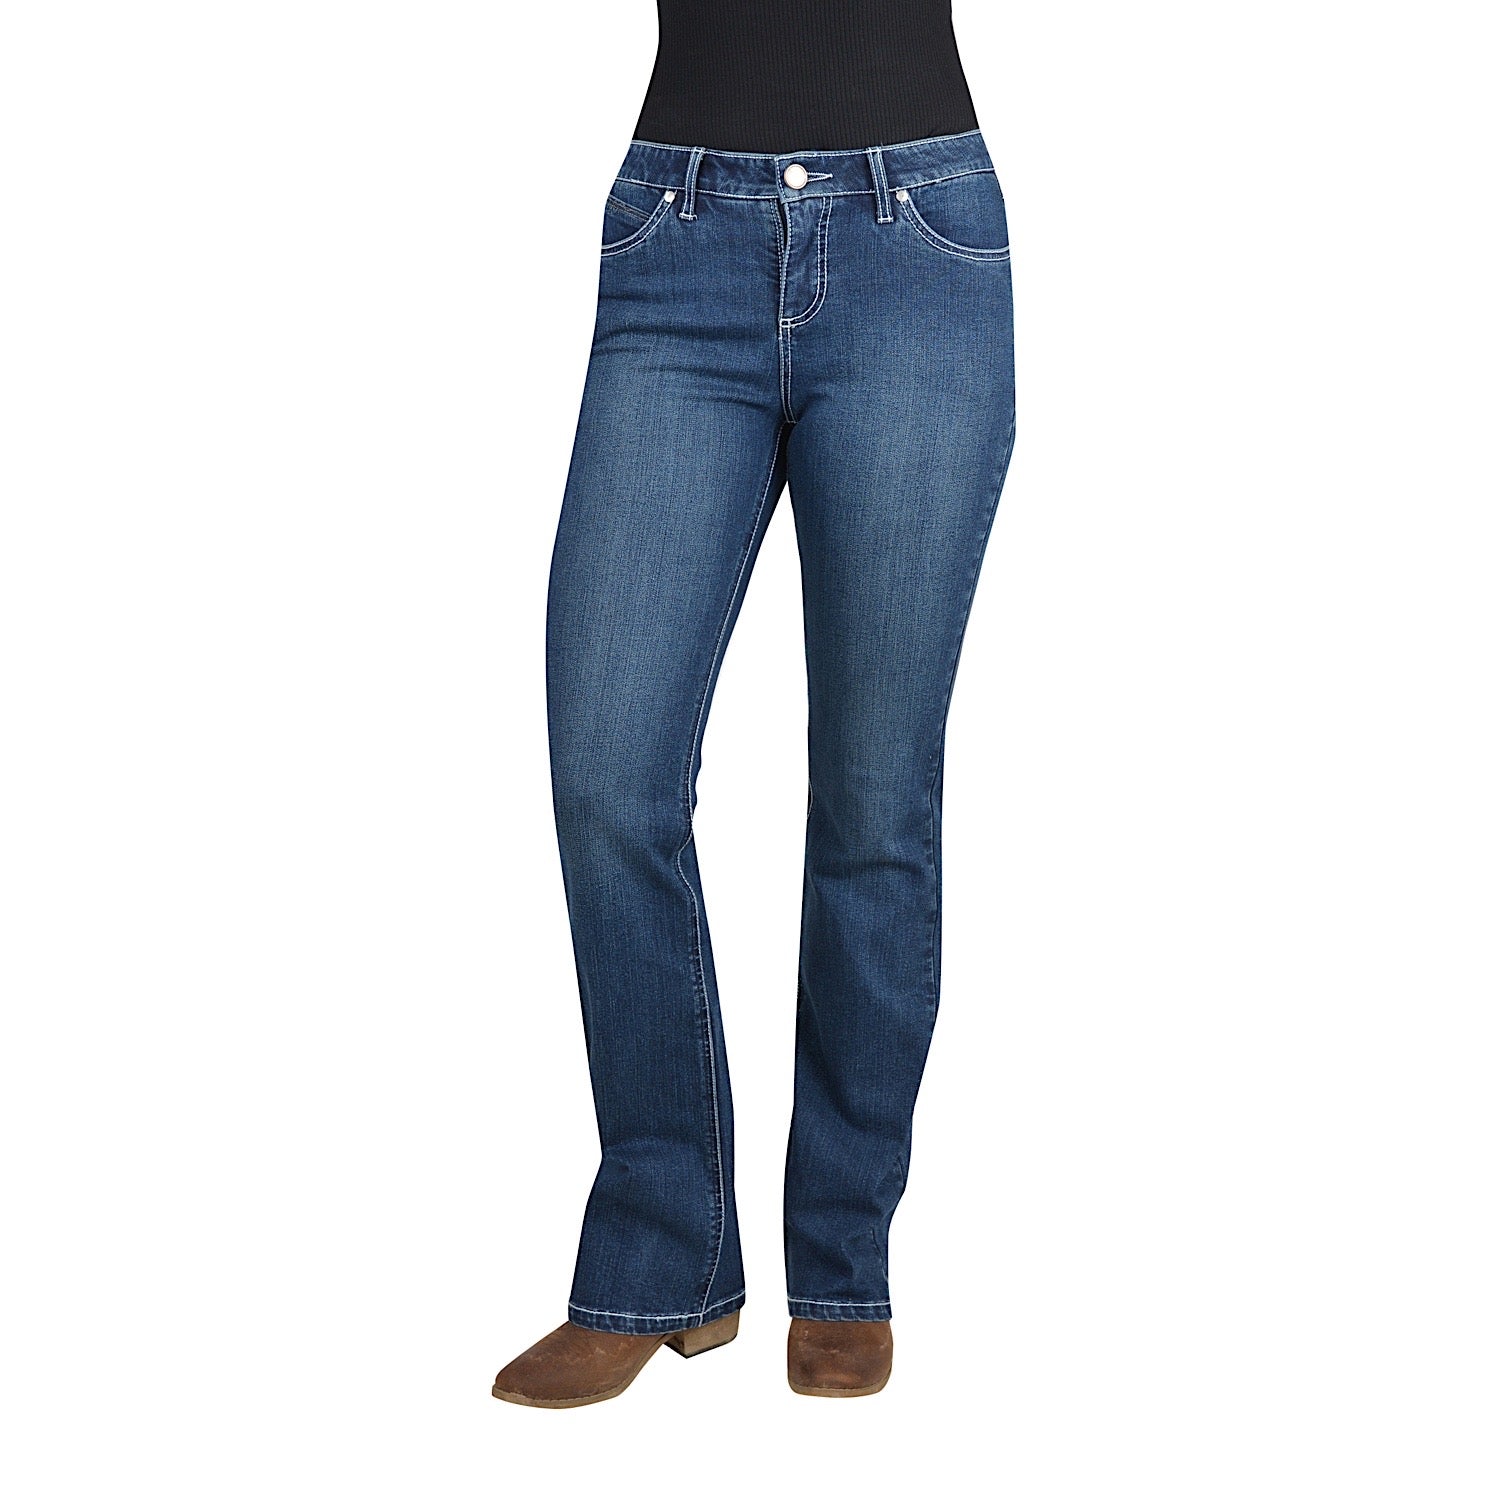 Wrangler Jeans - Q-Baby - Boot Cut Jeans - Booty Up